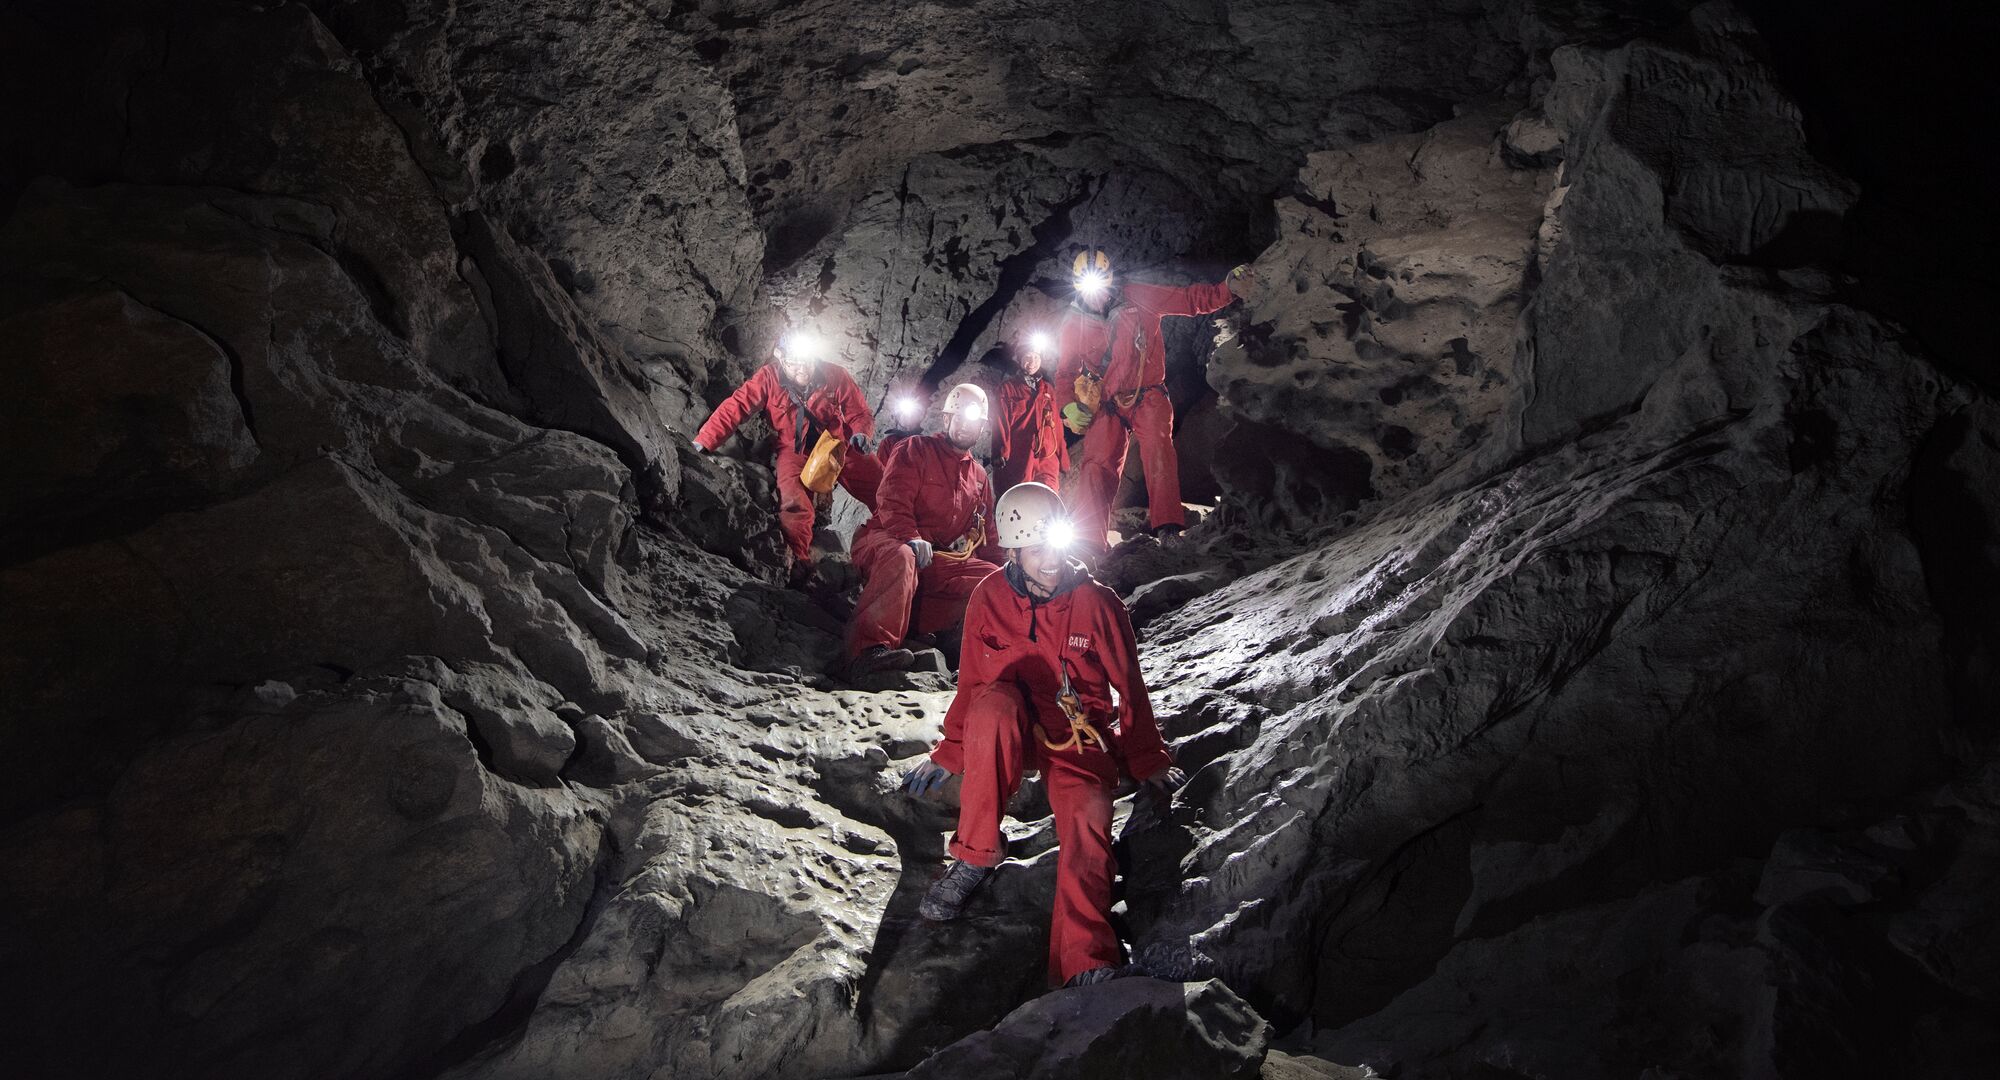 Group of people with head torches on deep in a cave on guided cave tour with Canmore Cave Tours